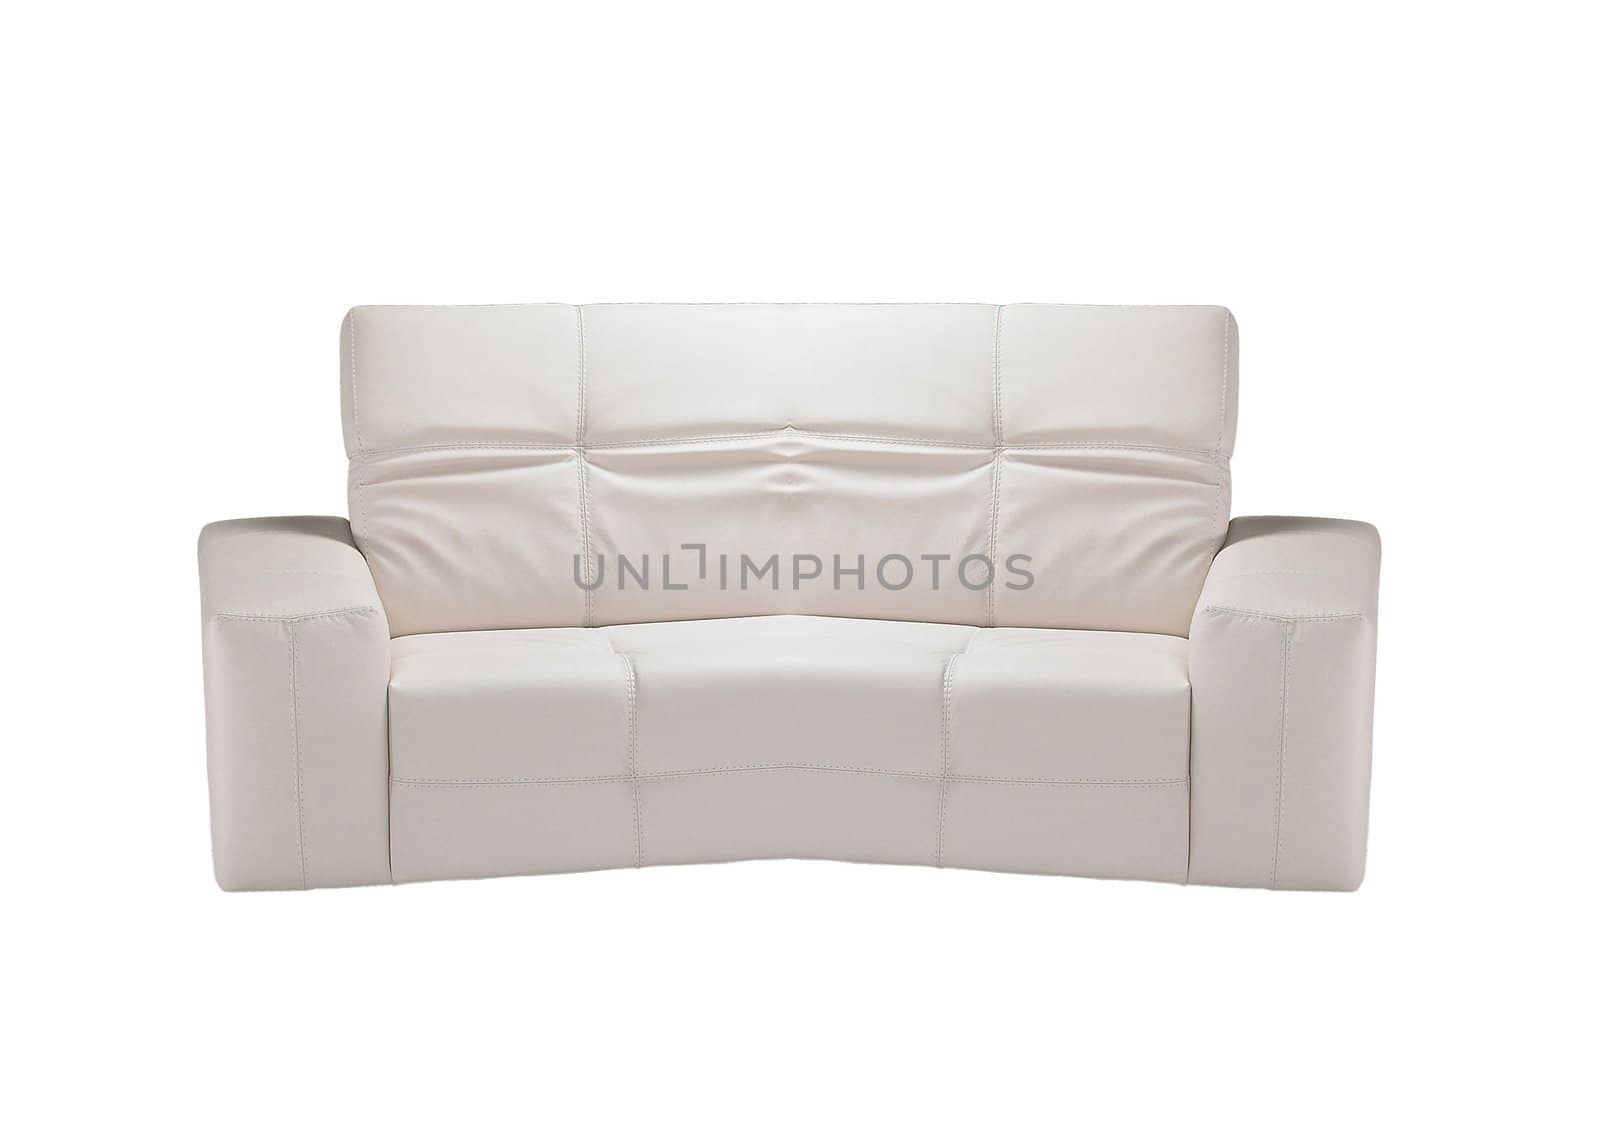 Image of a modern white leather sofa isolated by ozaiachin